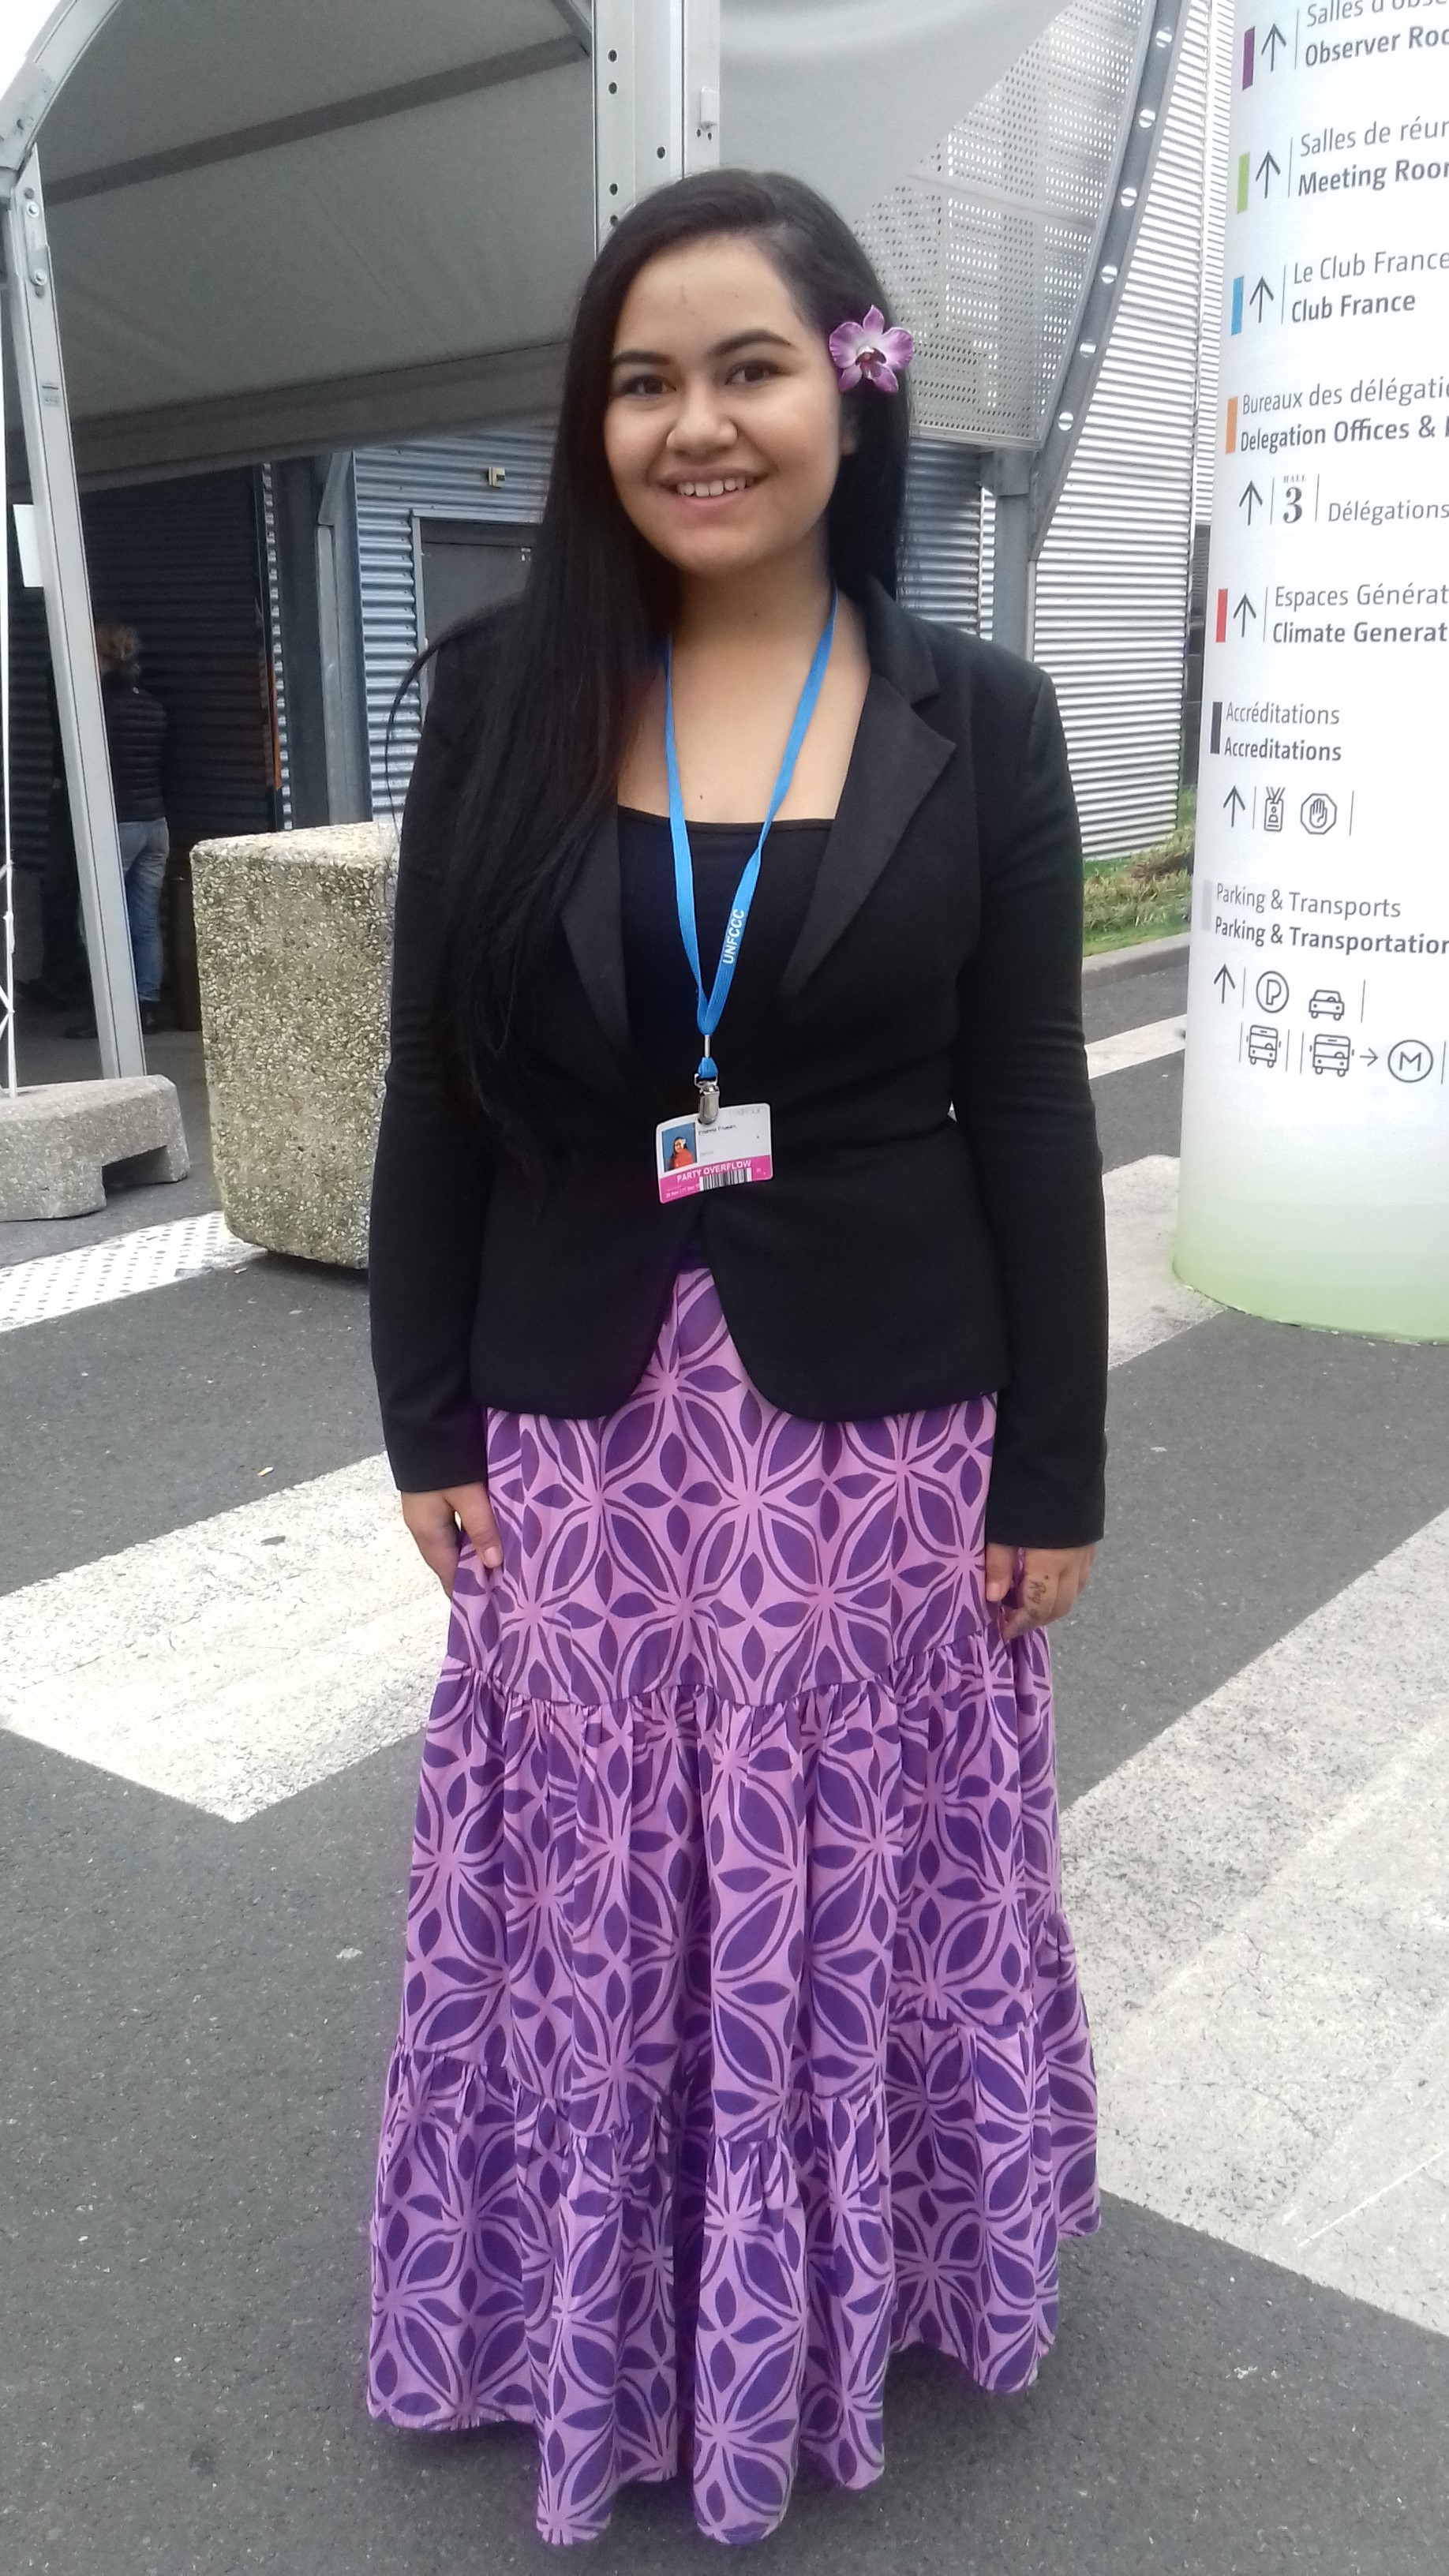 Samoan activist hopeful for a legally binding agreement in Paris